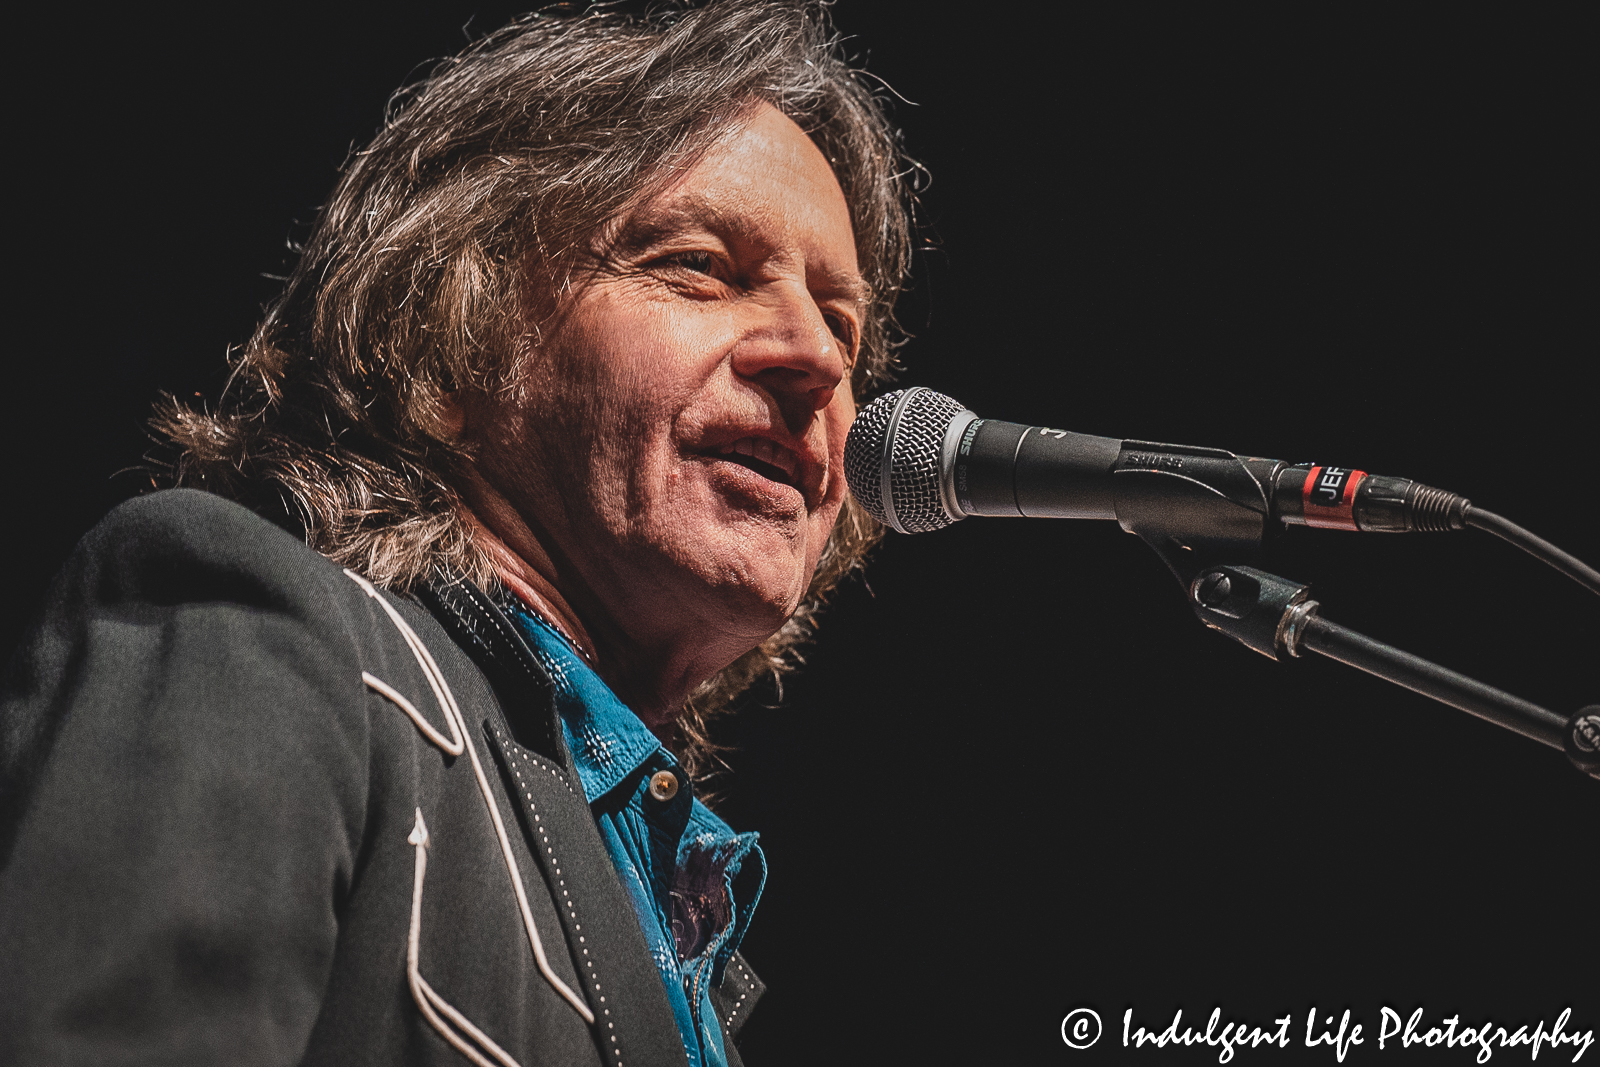 Nitty Gritty Dirt Band frontman Jeff Hanna performing live at Ameristar Casino's Star Pavilion in Kansas City, MO on July 8, 2023.